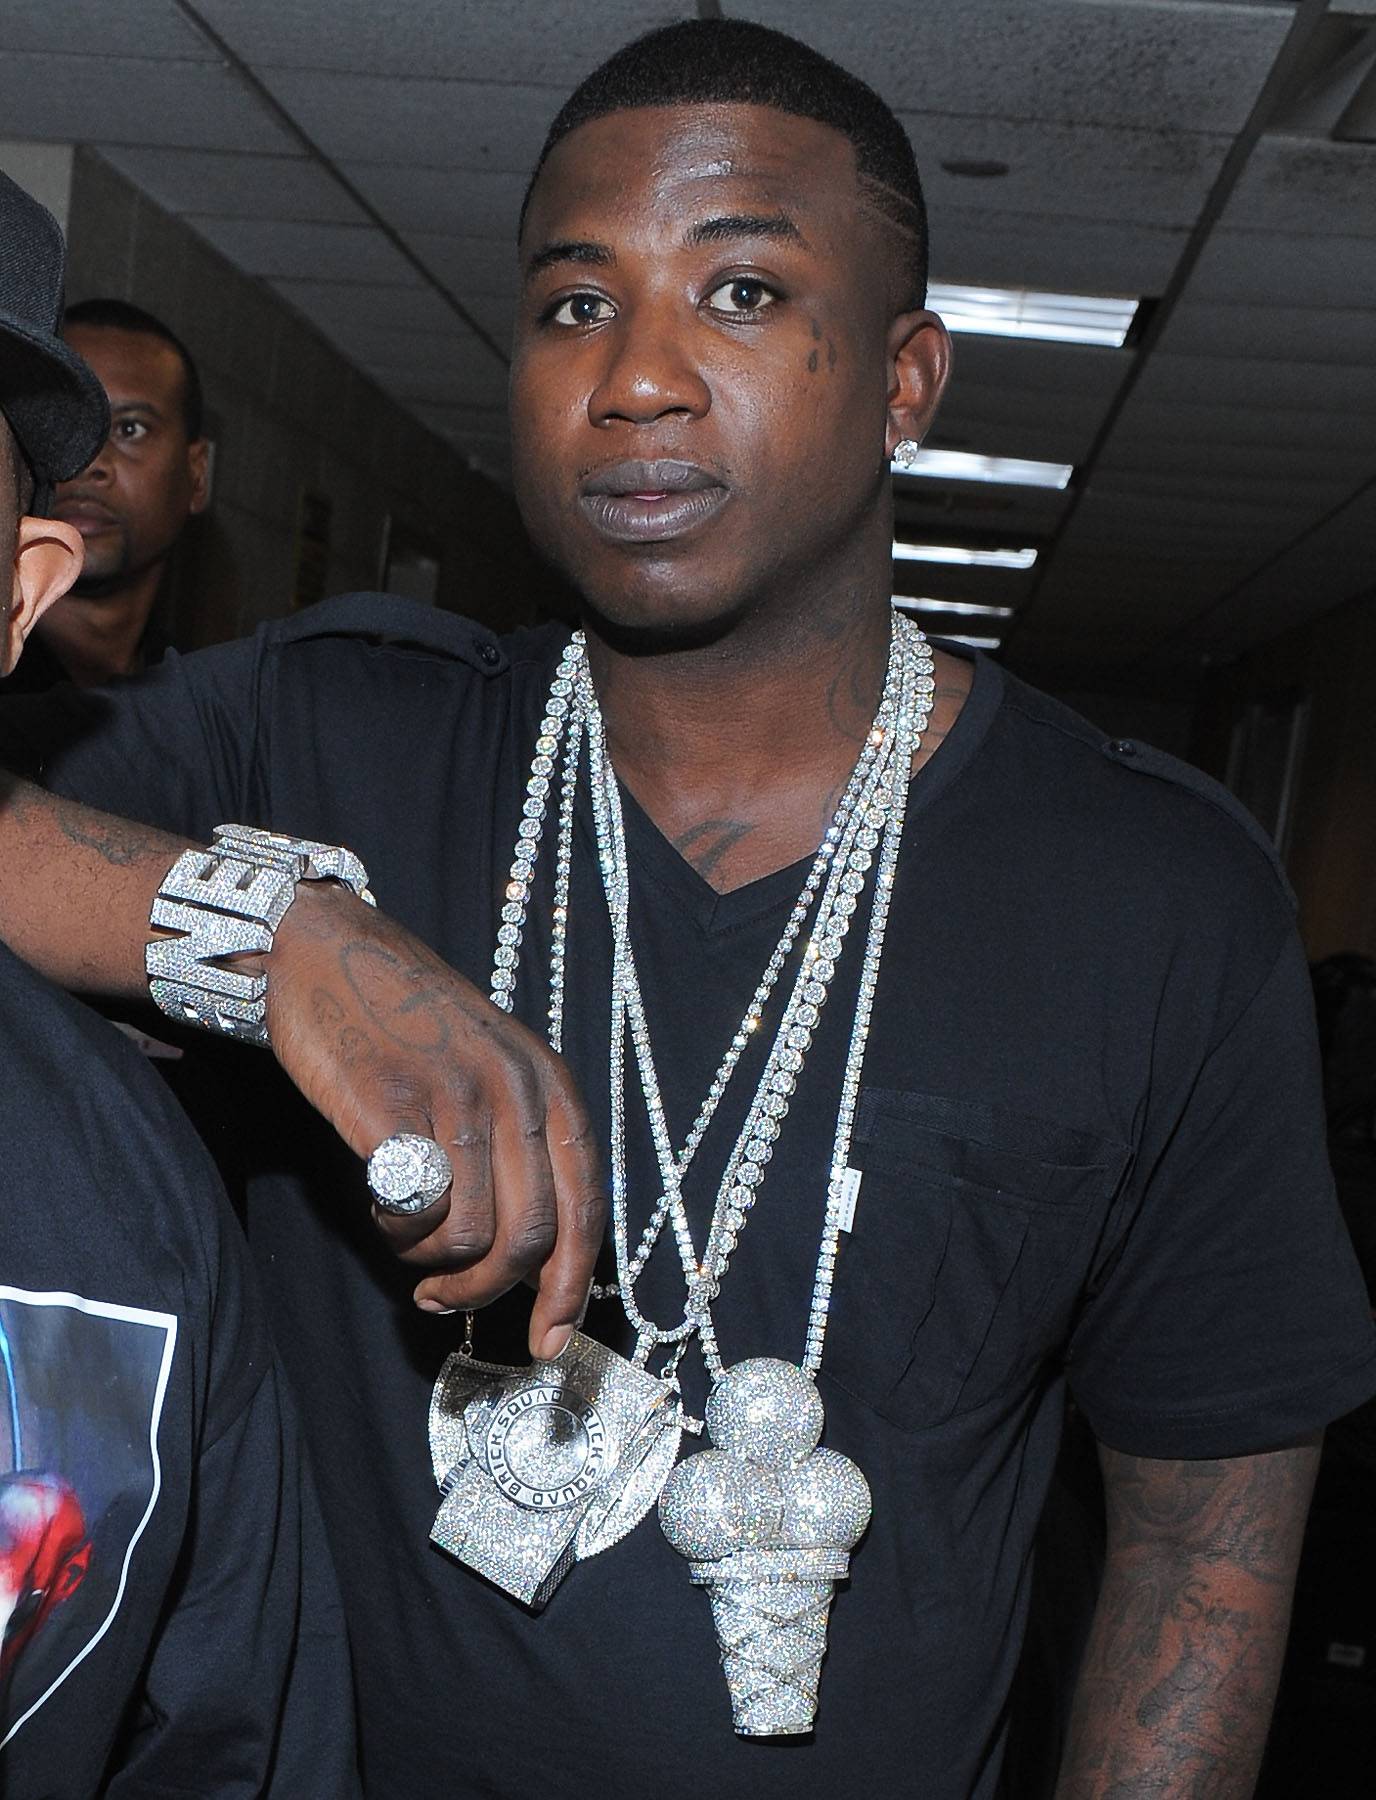 Gucci Mane @gucci1017 - - Image 11 from The Craziest Moments From Gucci  Mane's Twitter Rant